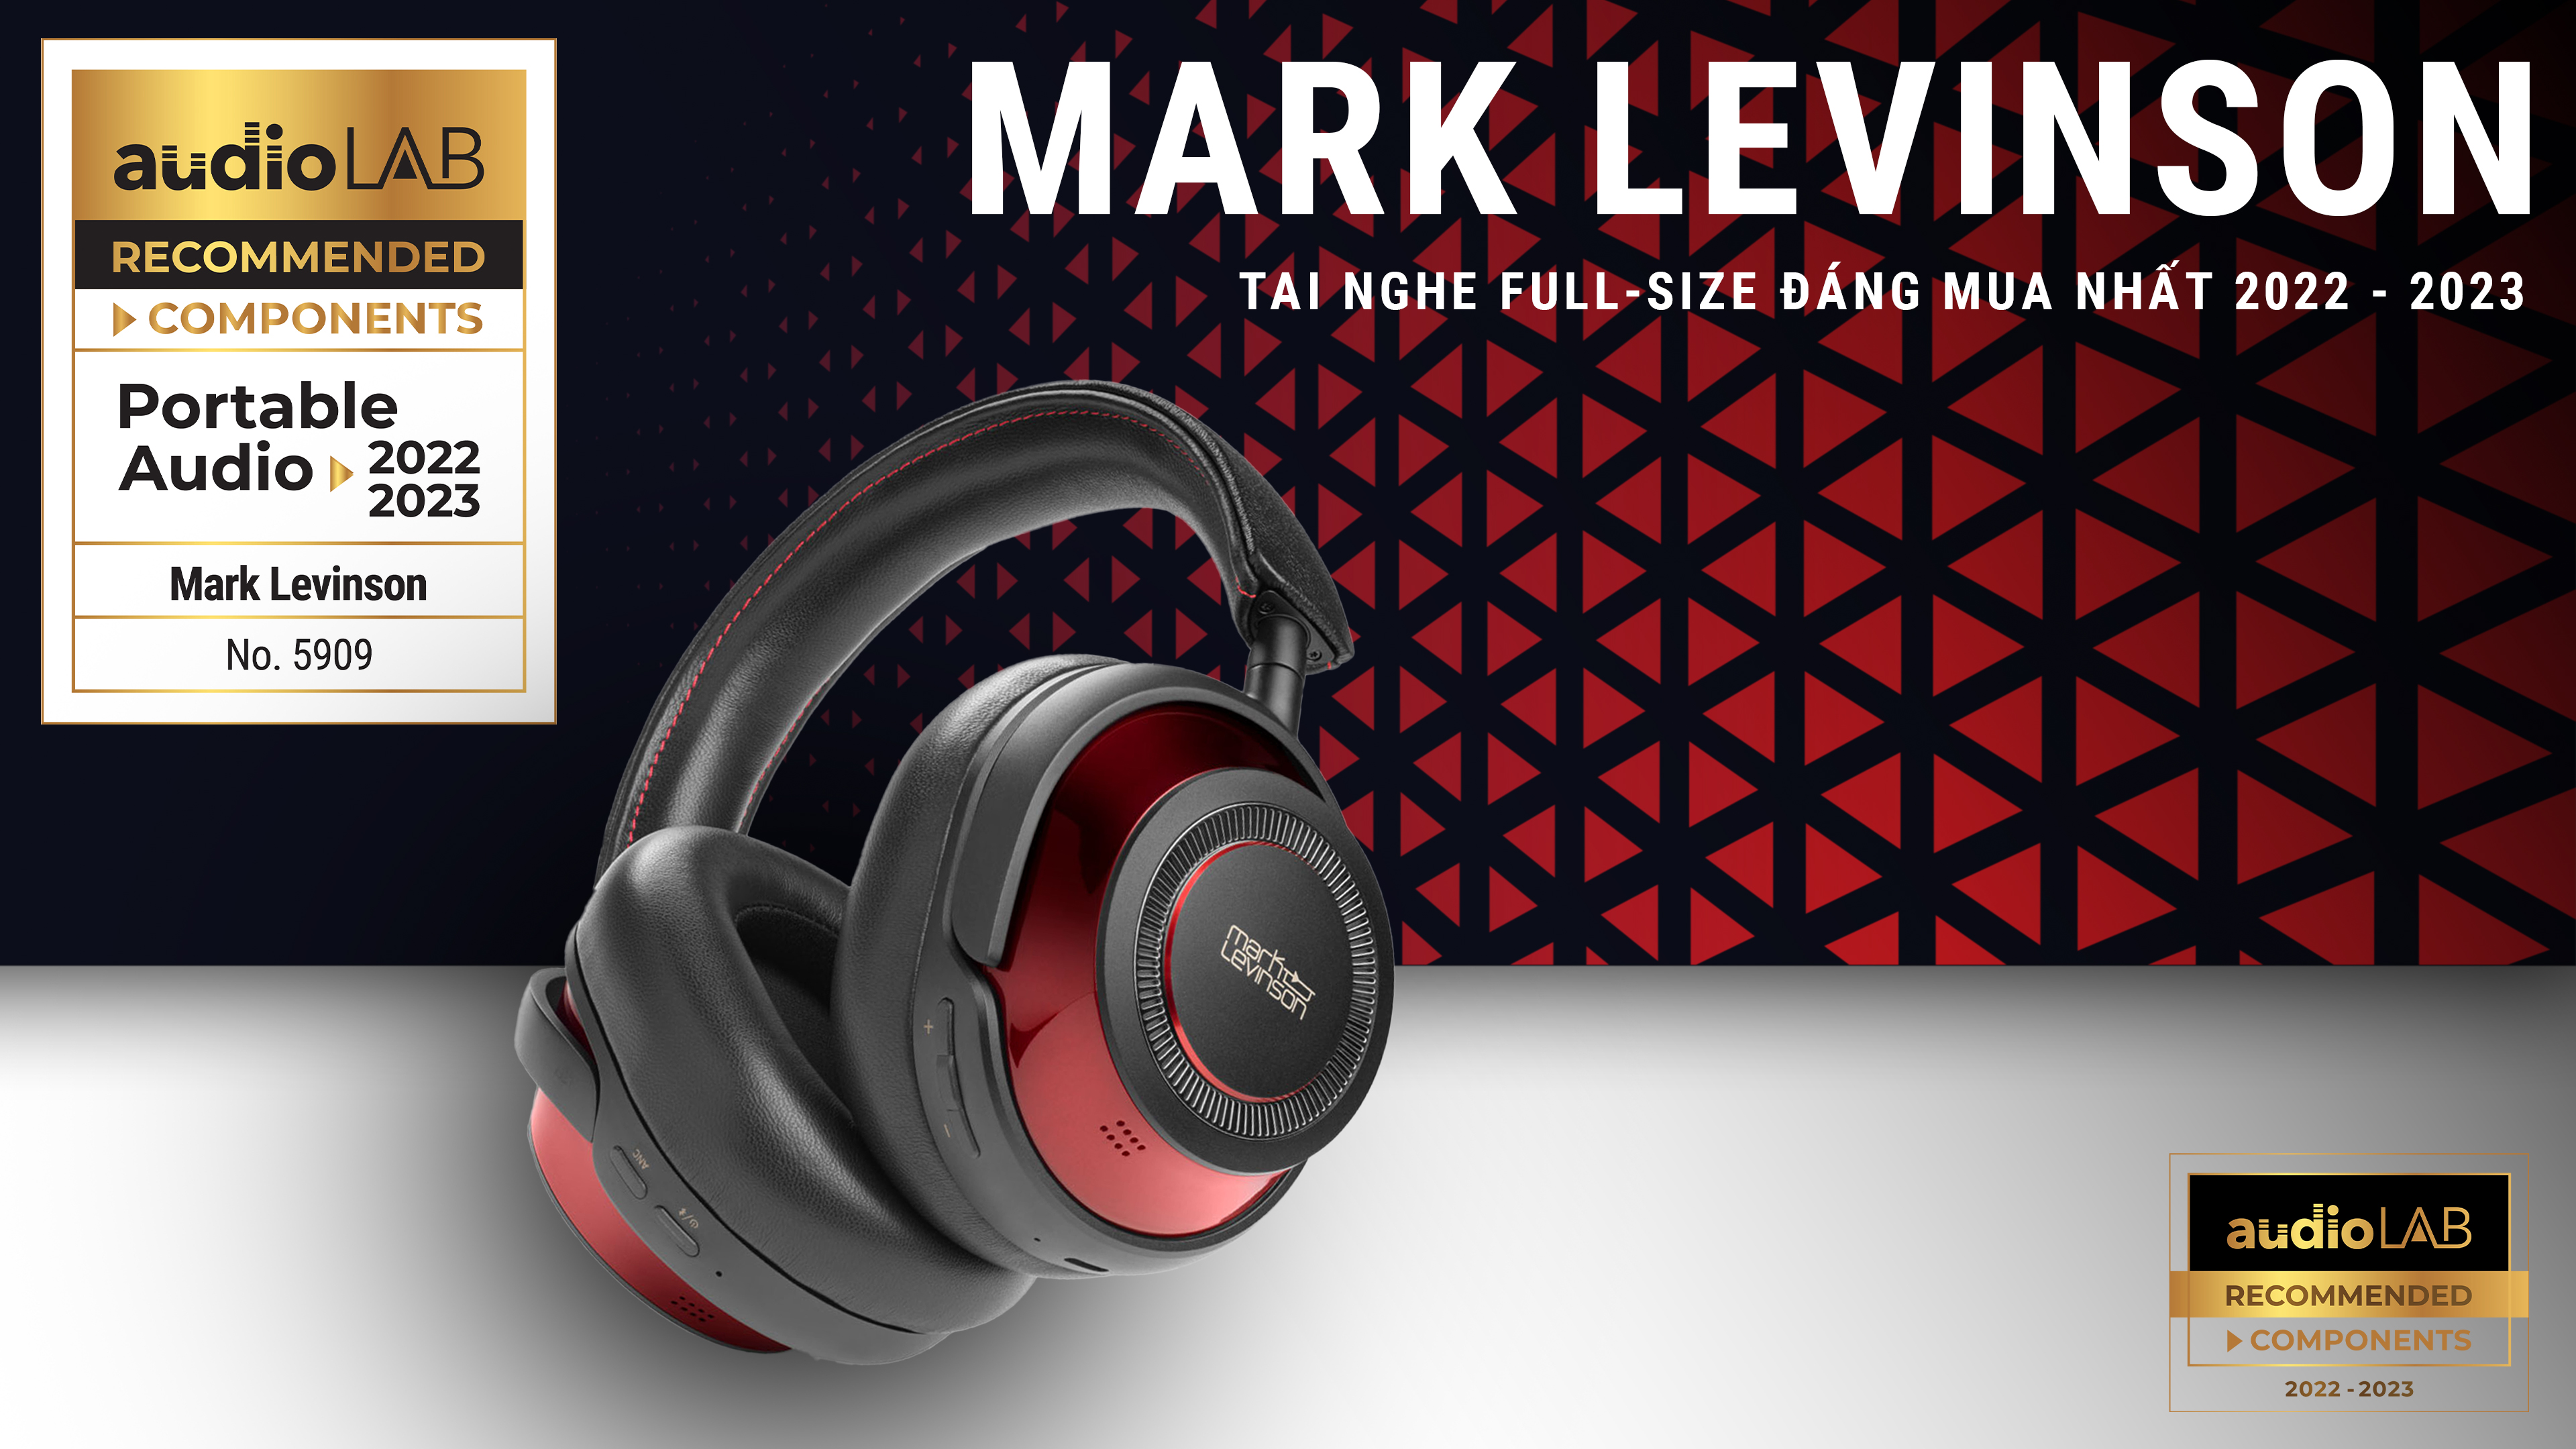 [Audio Lab Recommended 2022] Mark Levinson No.5909 – Tai nghe đáng sở hữu nhất 2022 - 2023